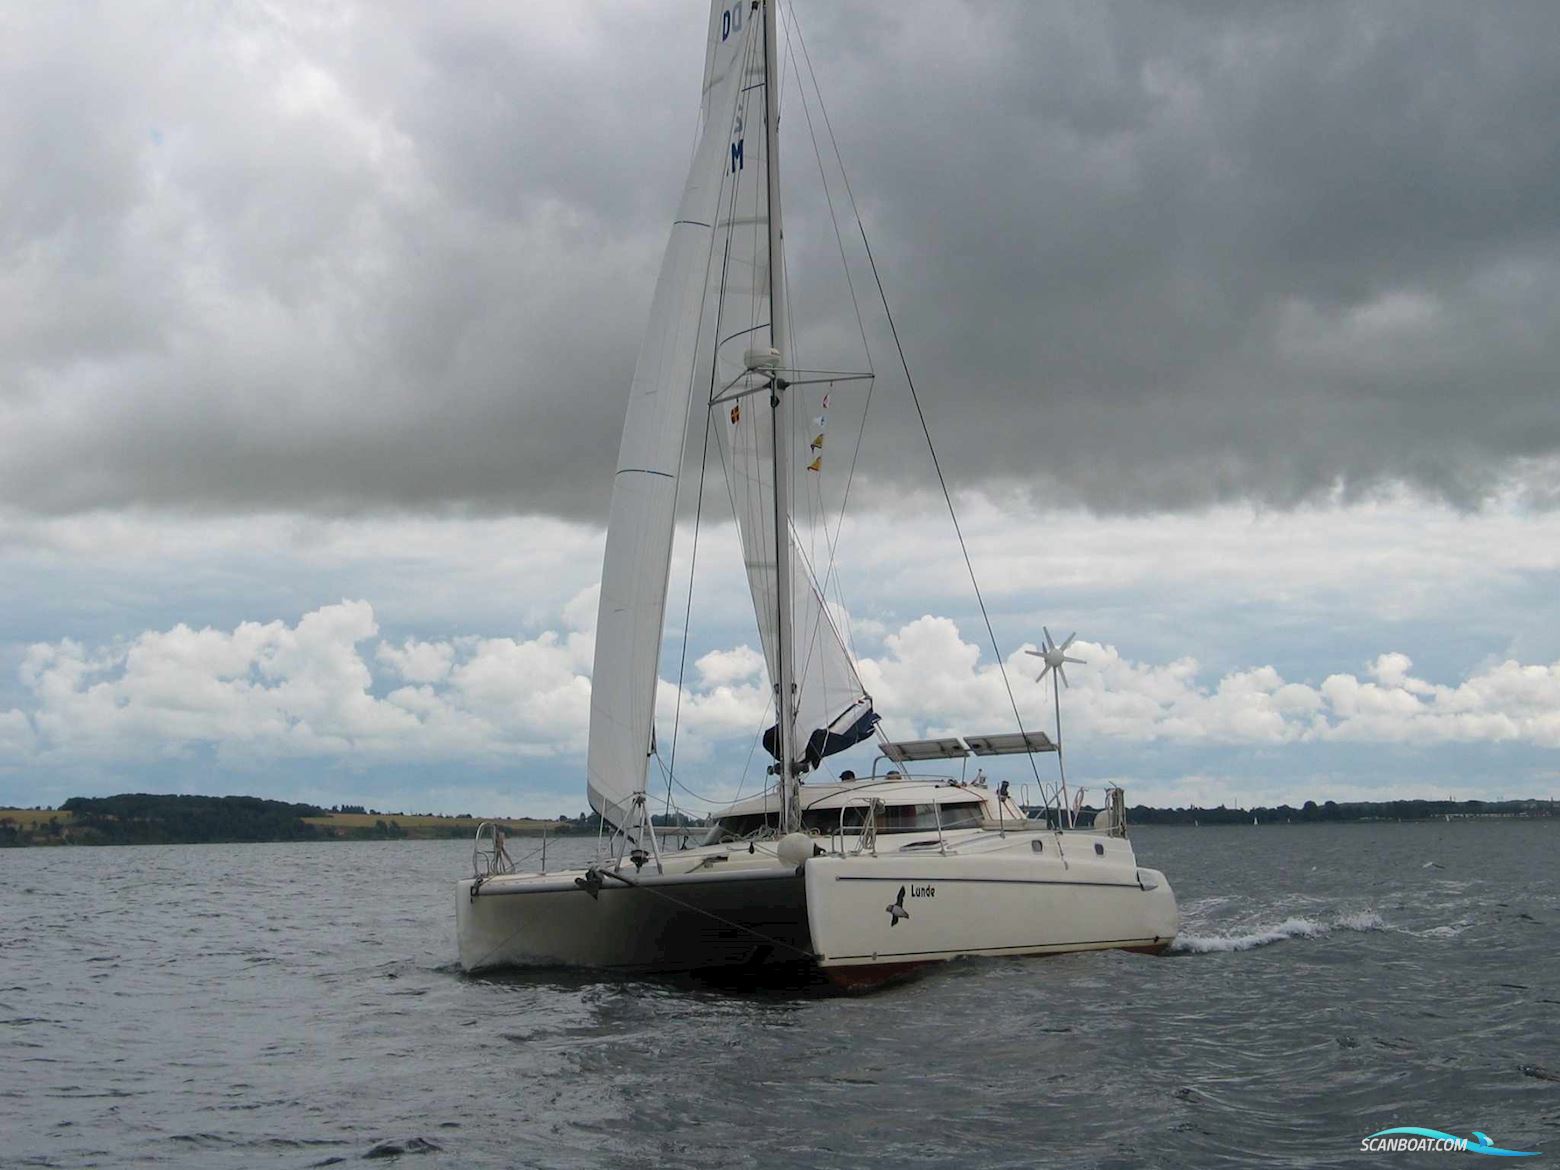 Fountaine Pajot Tobago 35 Multi hull boat 1994, with D1 30F engine, Denmark